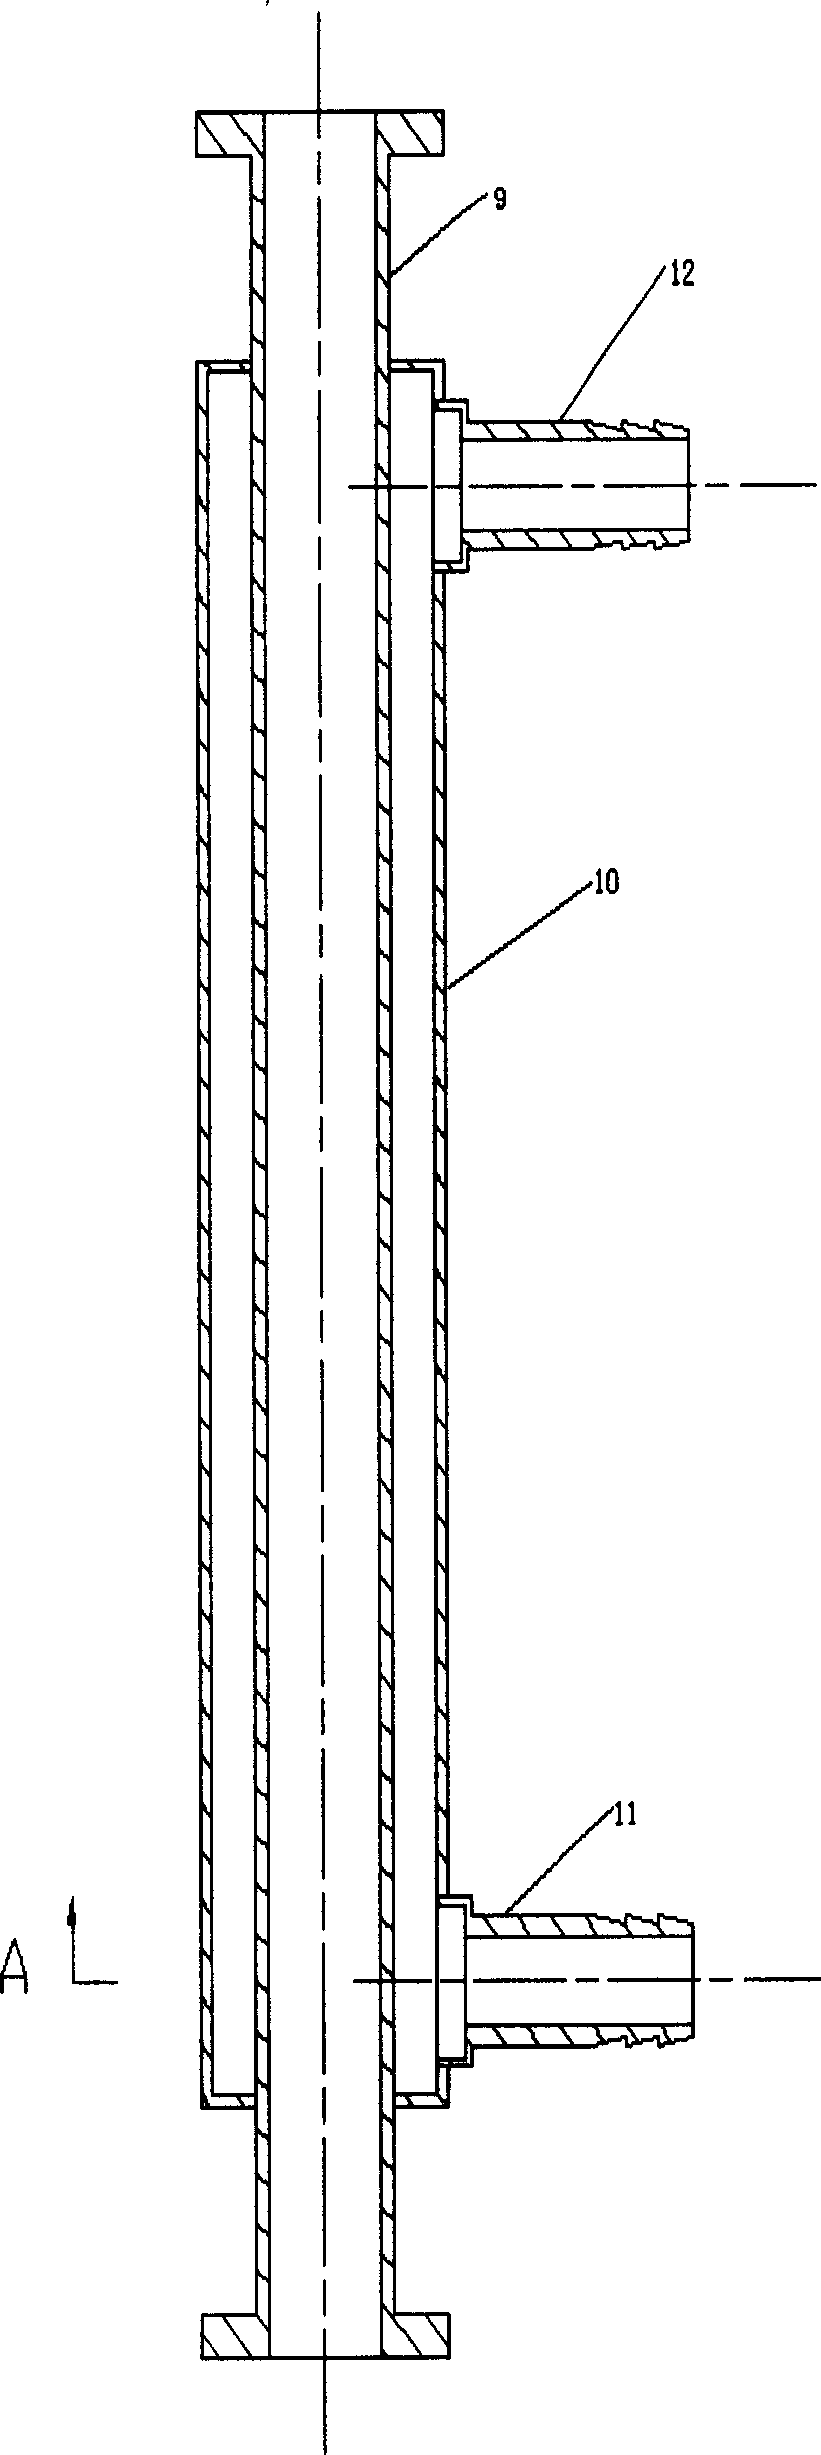 Device with stepping type short tubes for removing inhalable particulates by thermophoresis